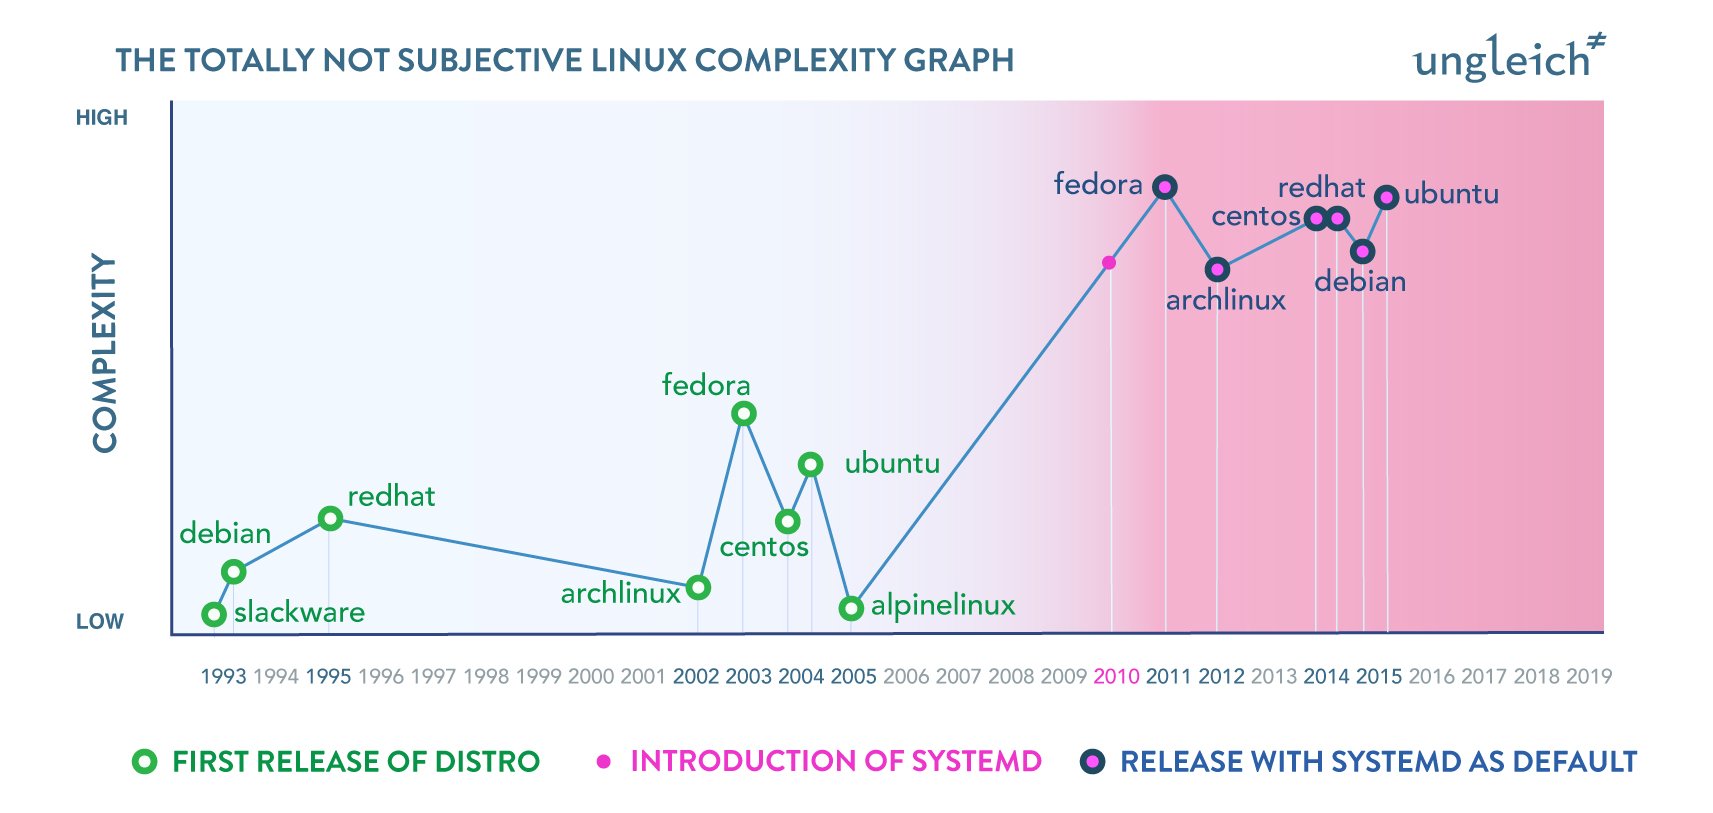 linux-complexity-graph.jpg